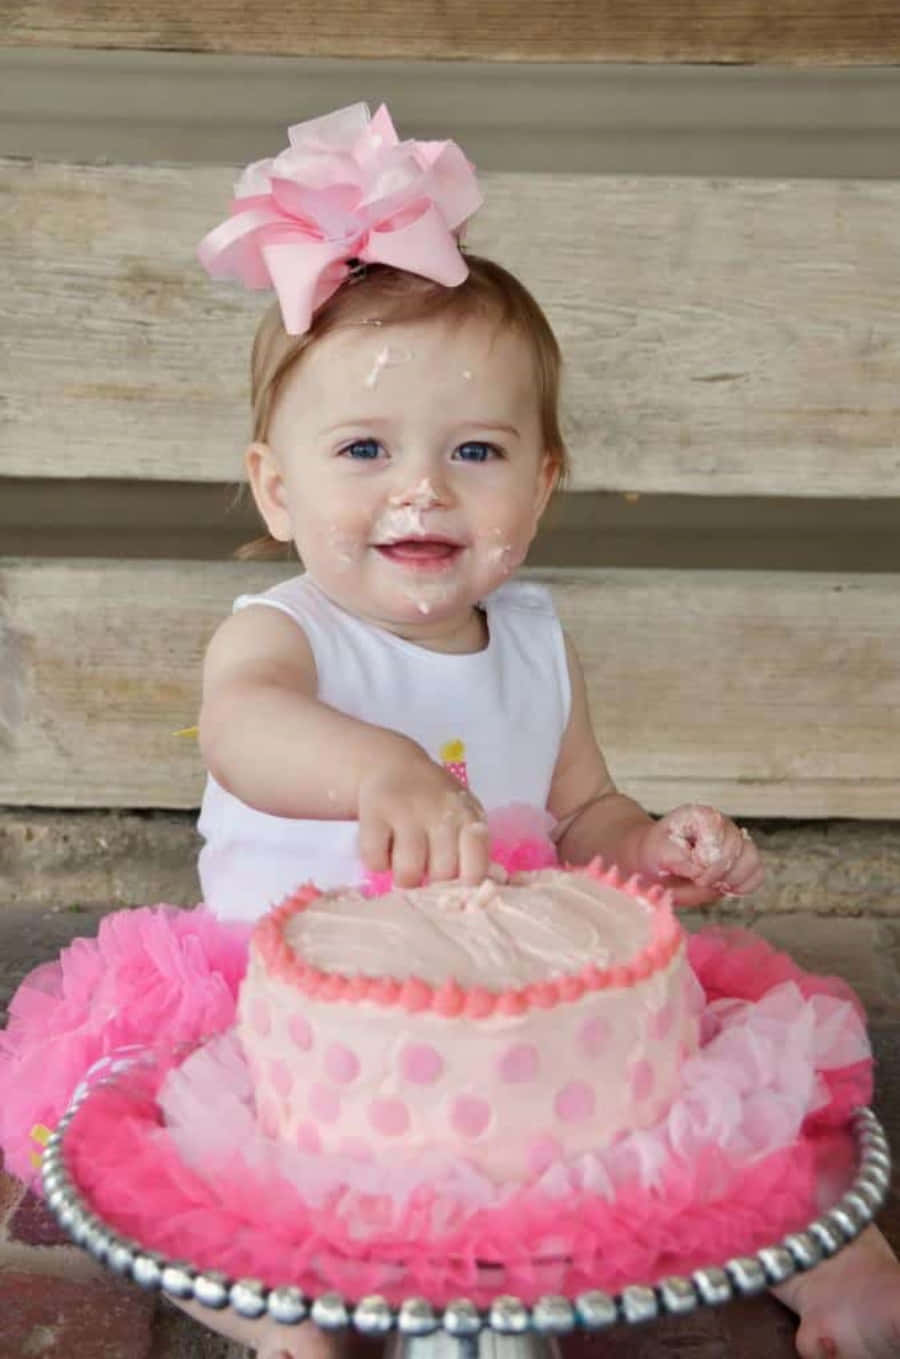 A Baby Girl In Pink Tutu Is Eating A Cake